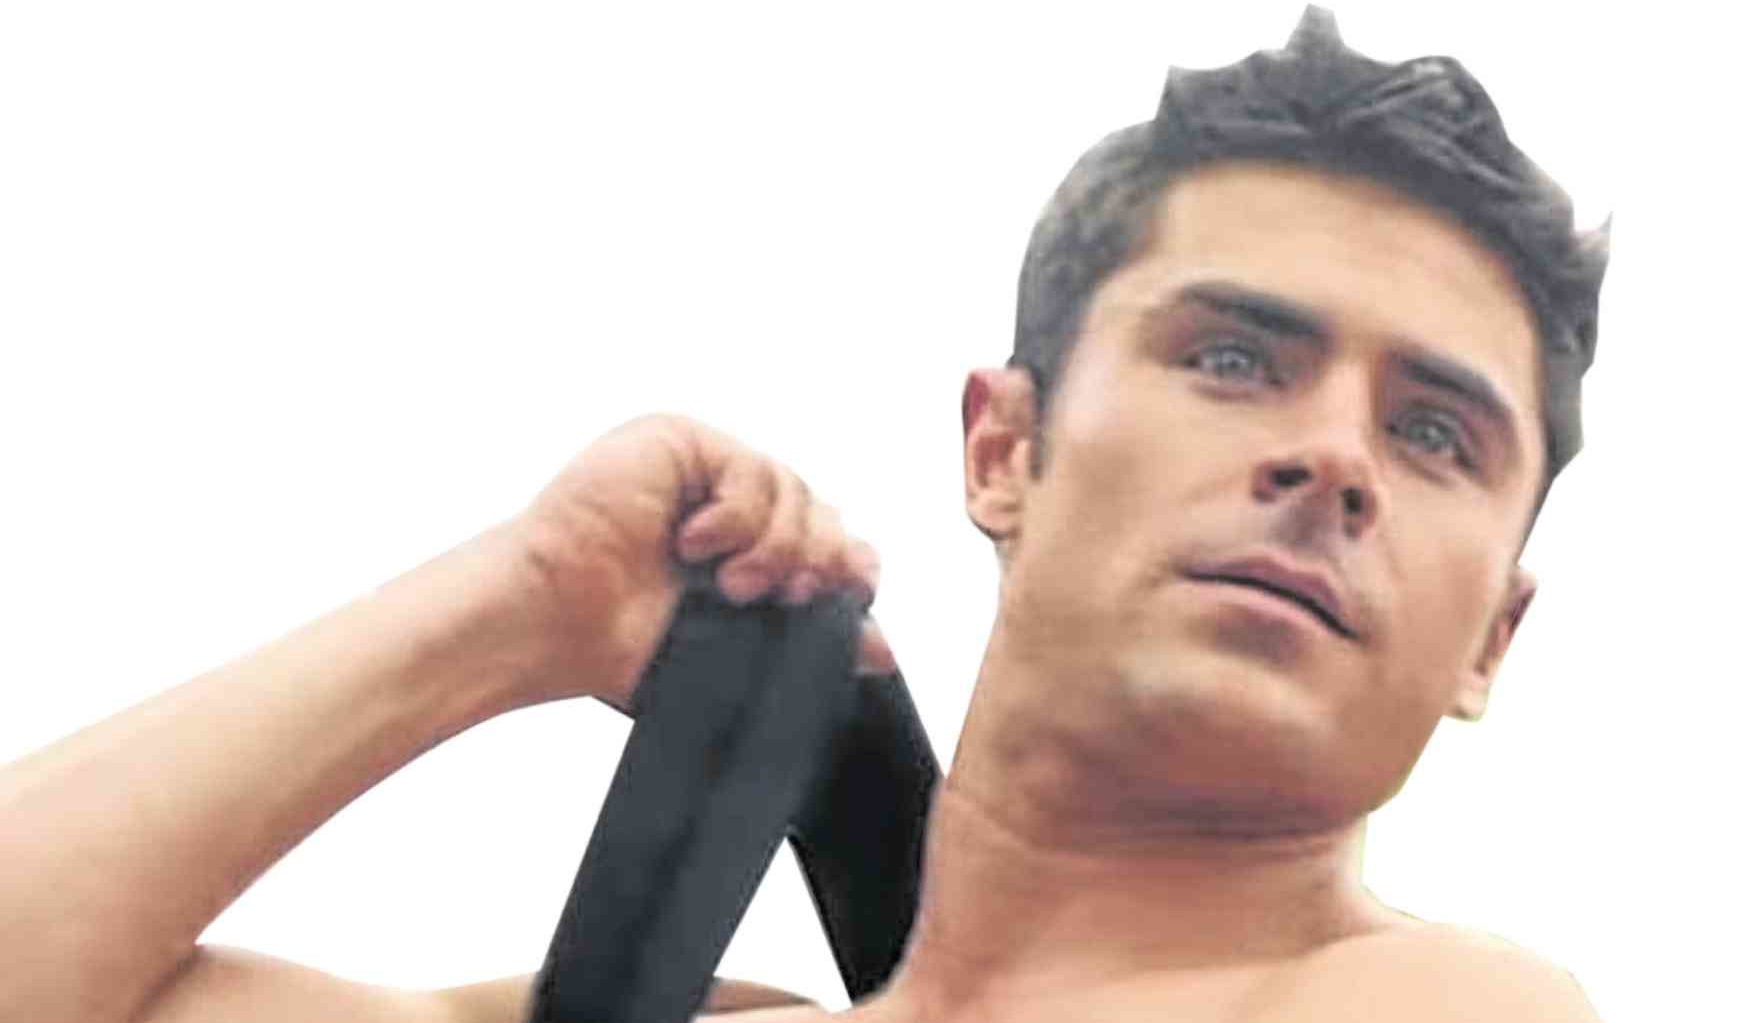 Zac Efron ‘lends charisma’ to killer role